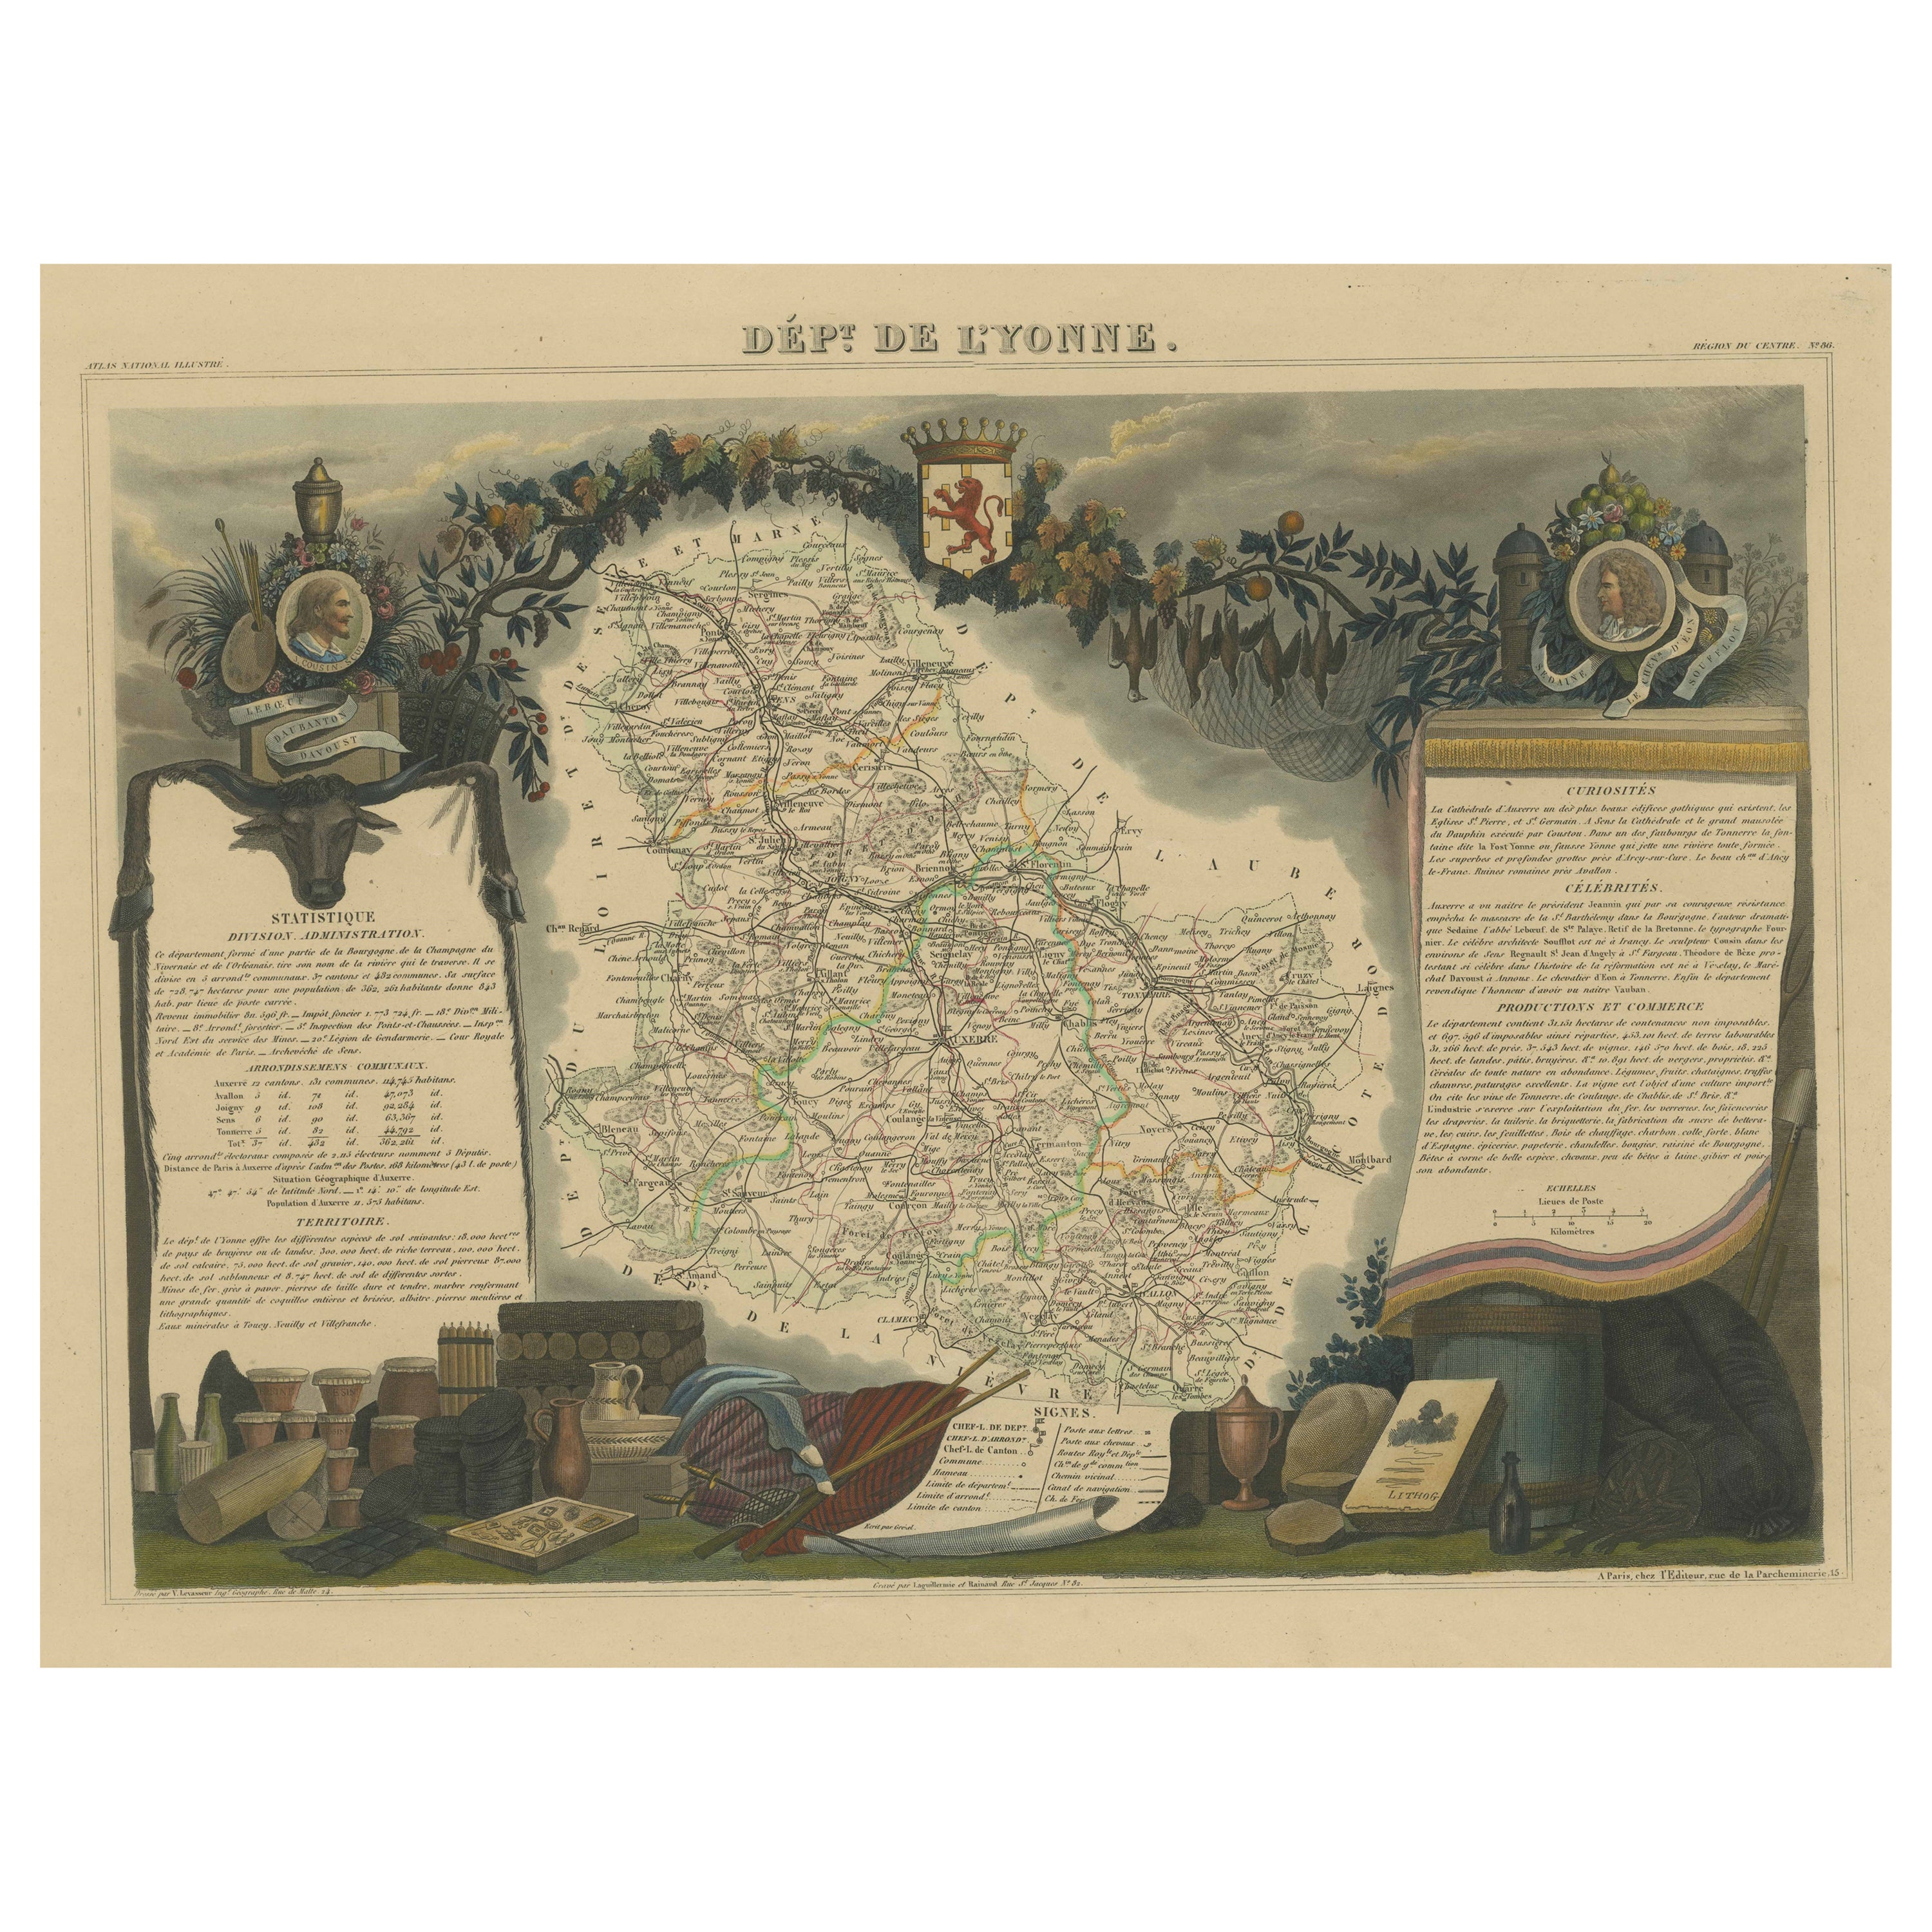 Hand Colored Antique Map of the Department of L'Yonne, France For Sale